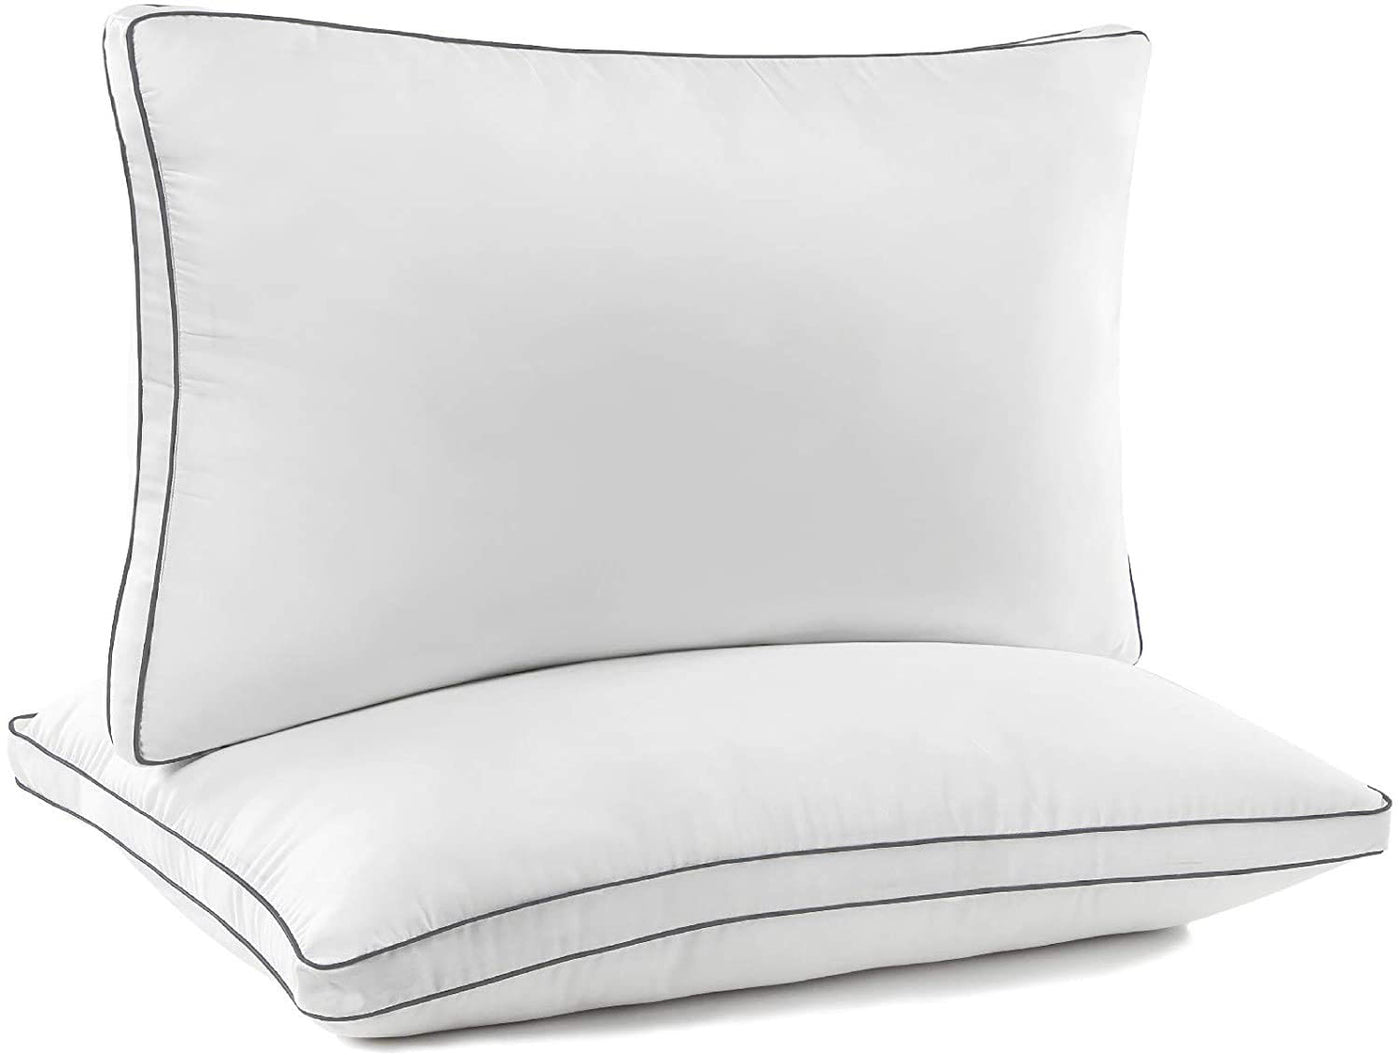 Pillows designed for side sleepers and stomach sleepers. Pack of 2 side sleepers pillow with 2" gusset.